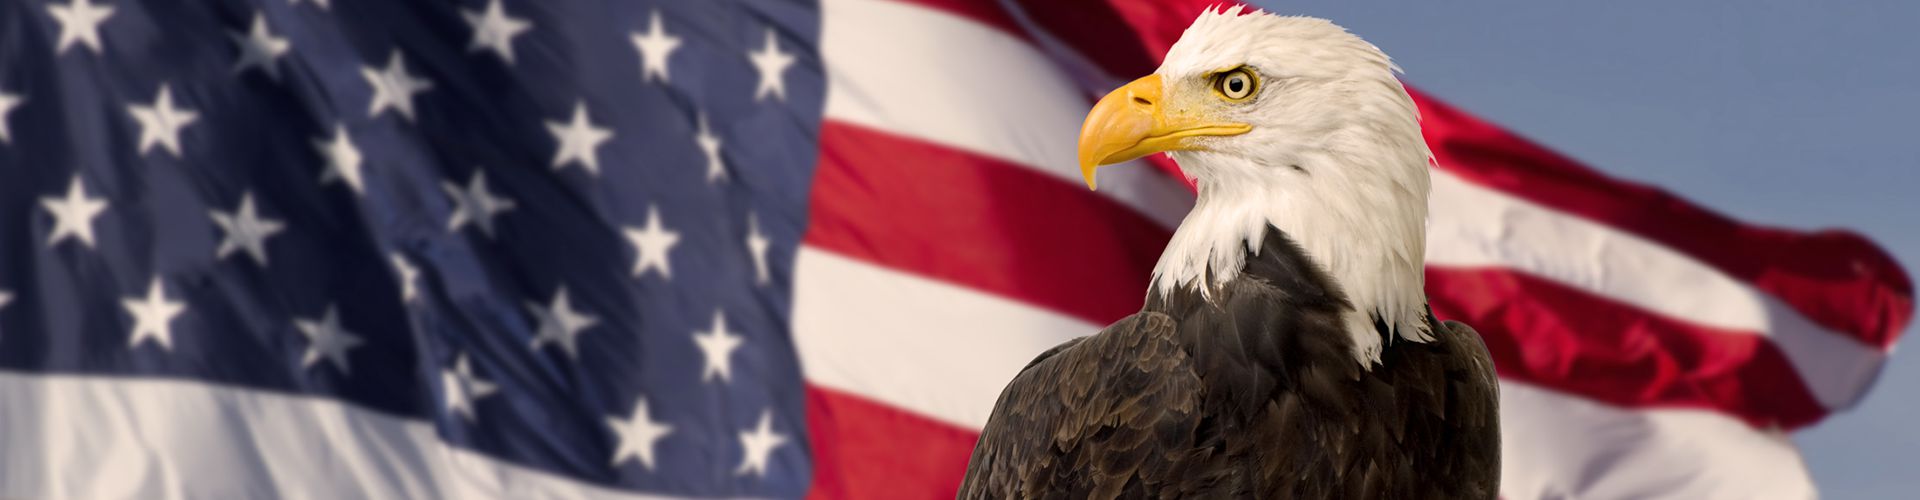 image of eagle in front of american flag